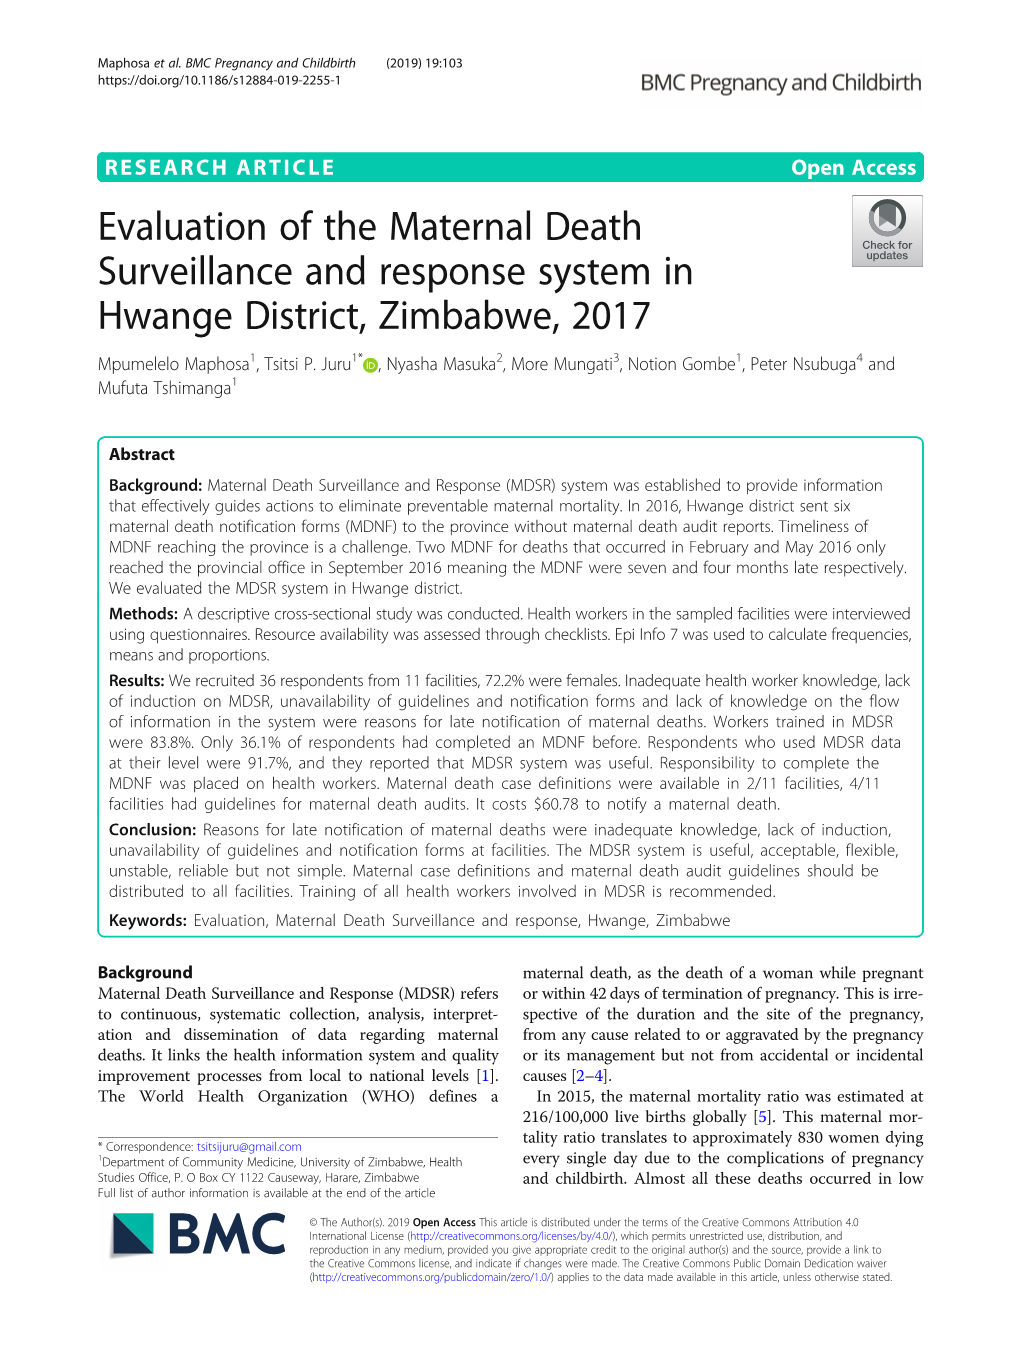 Evaluation of the Maternal Death Surveillance and Response System in Hwange District, Zimbabwe, 2017 Mpumelelo Maphosa1, Tsitsi P